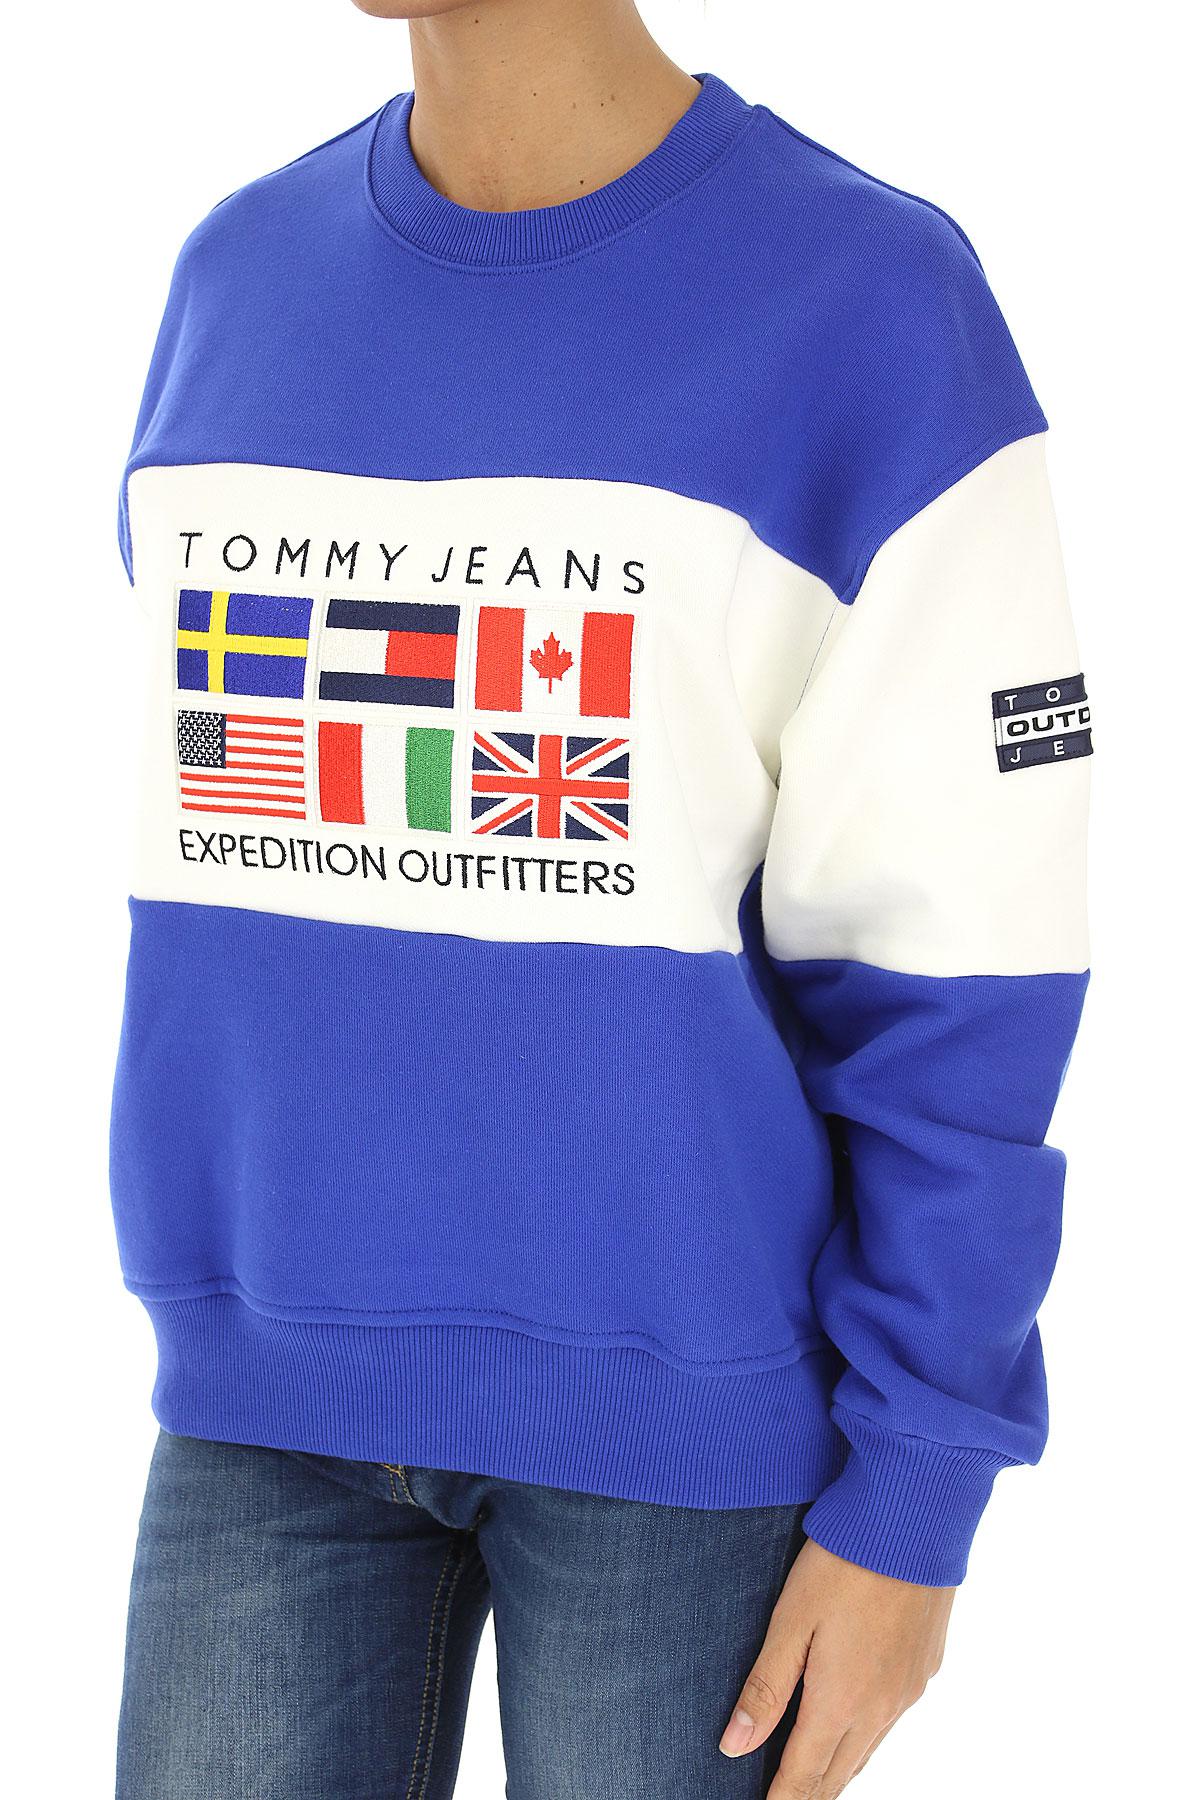 tommy jeans expedition outfitters